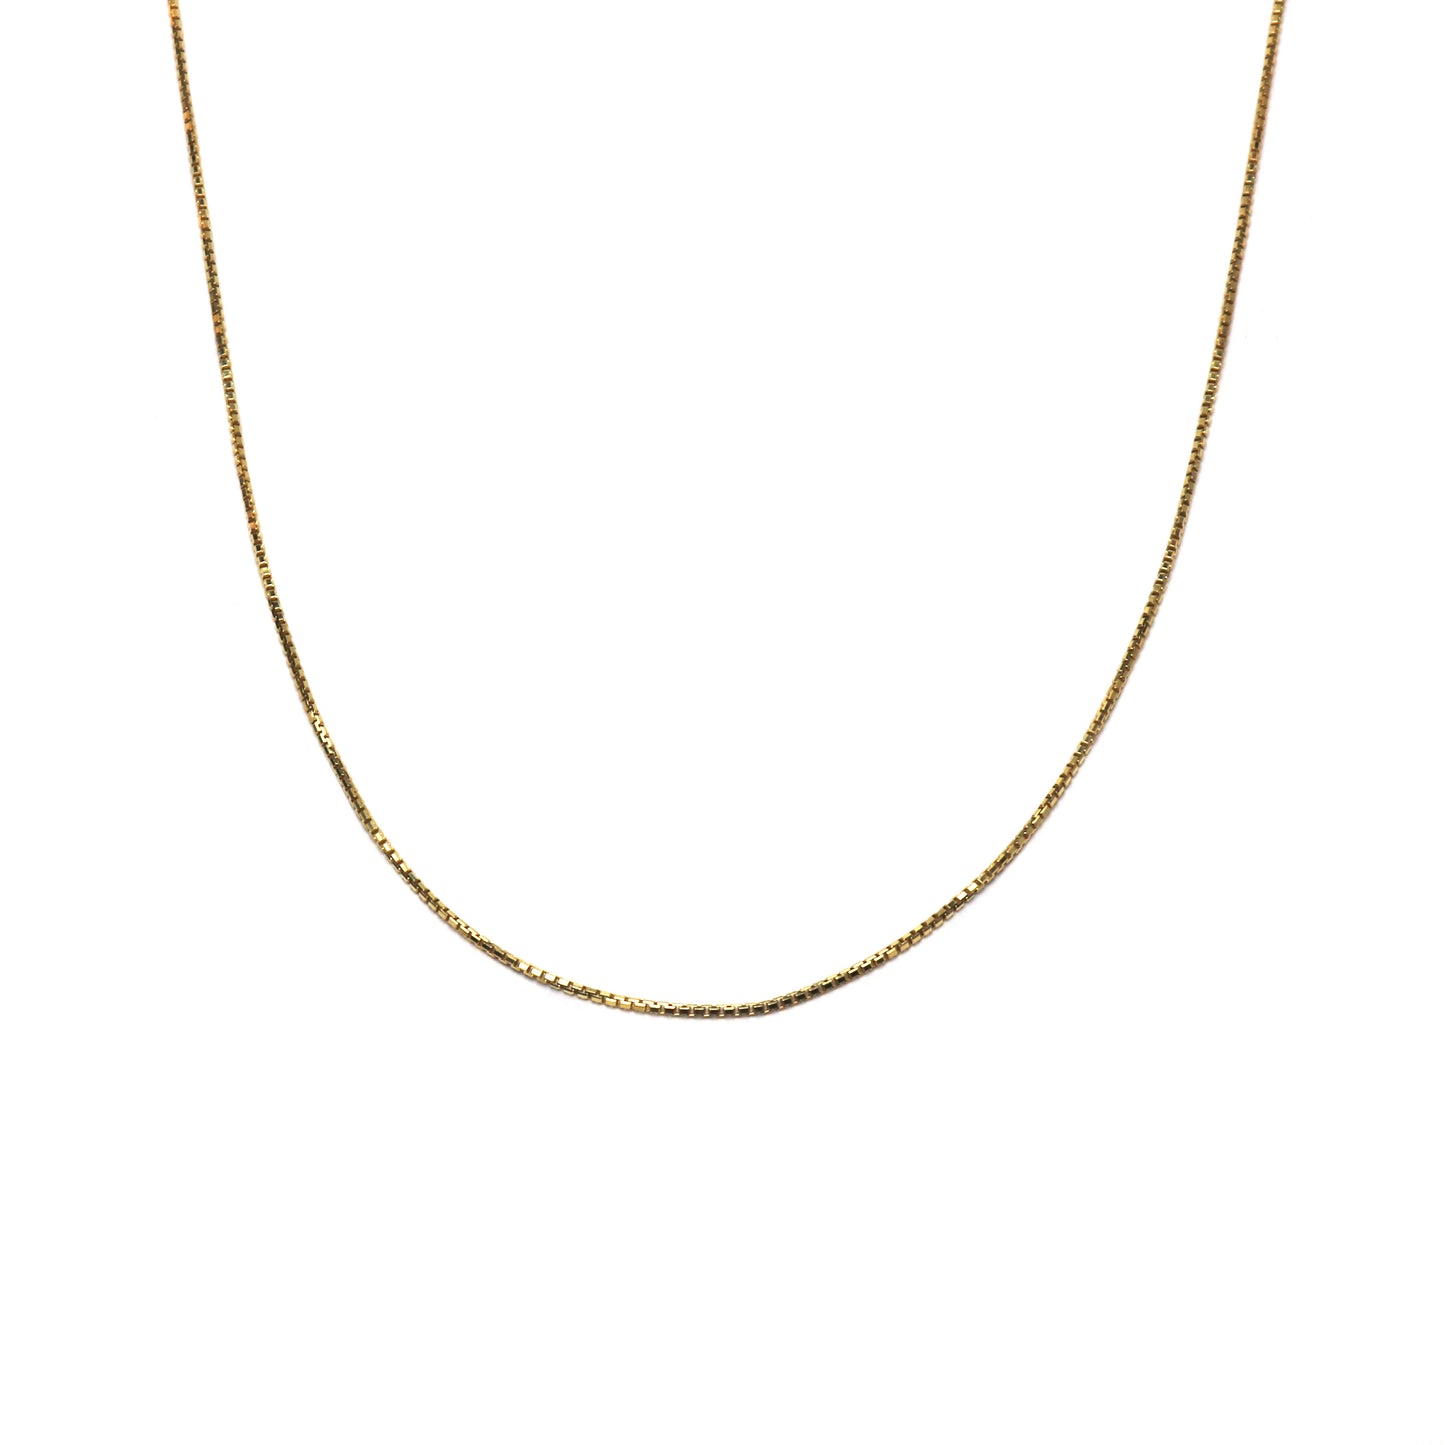 Cala necklace - Gold